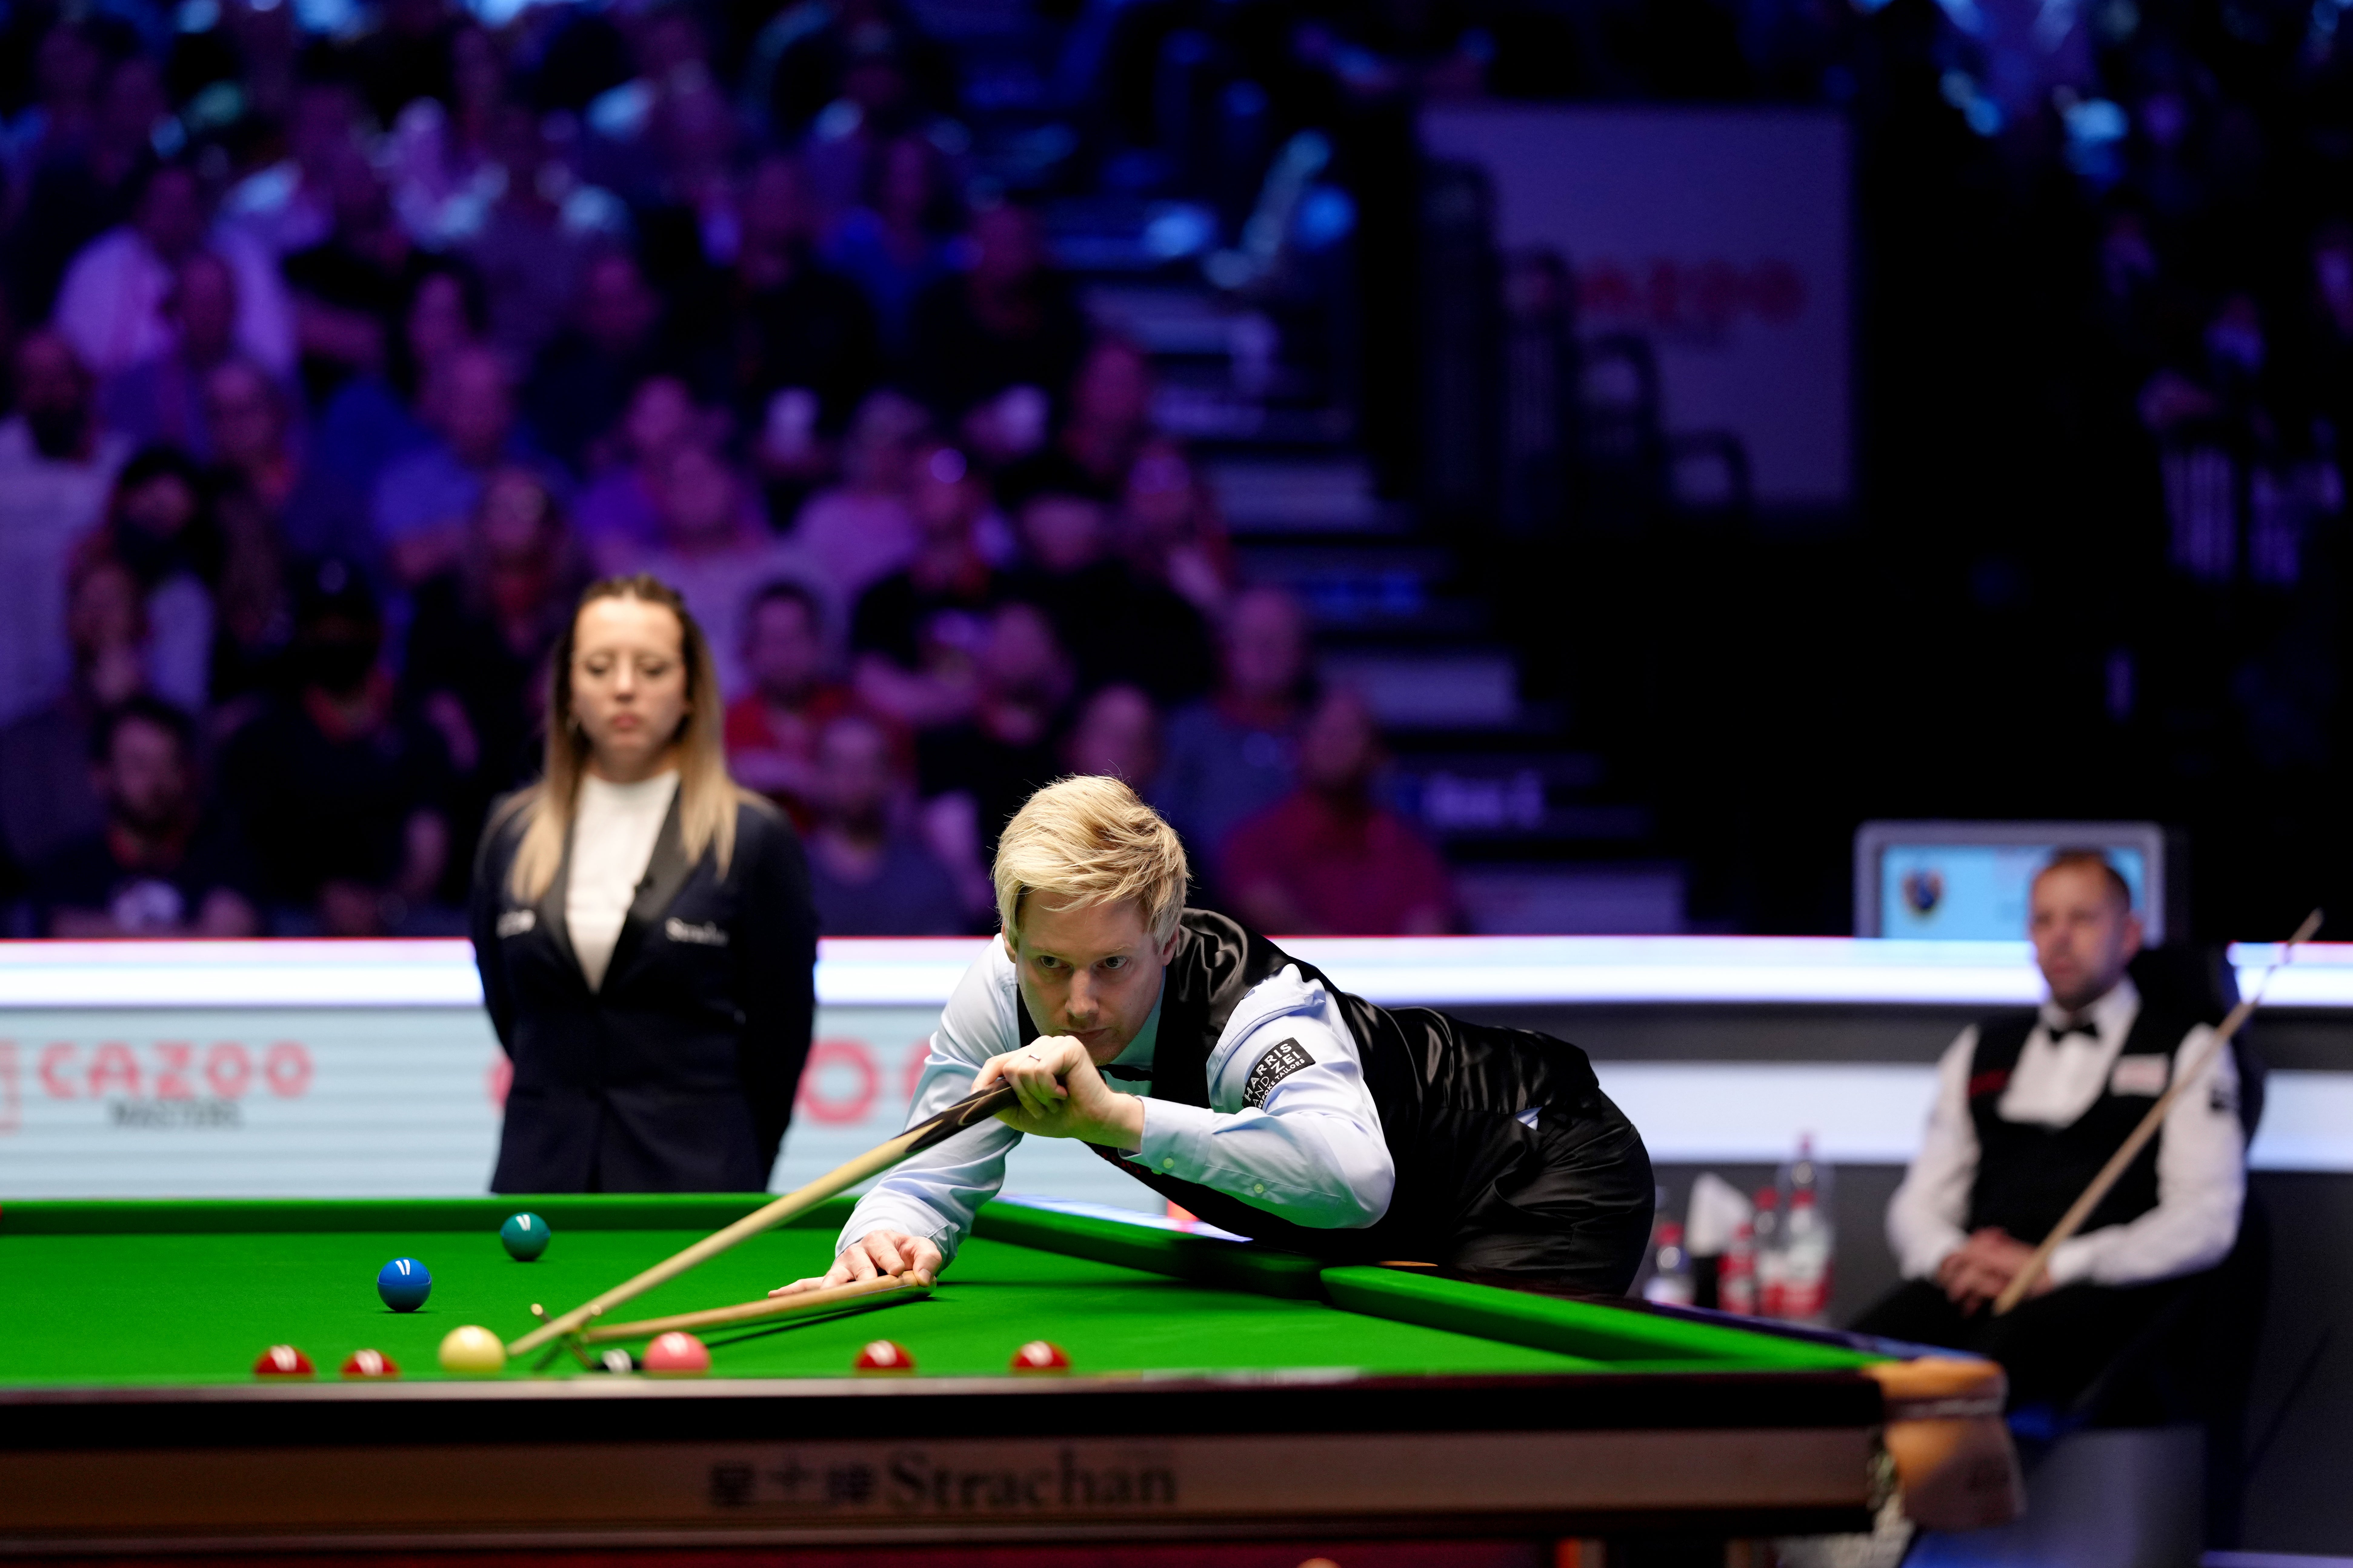 Neil Robertson at the table as opponent Barry Hawkins watches on in their Alexandra Palace final (John Walton/PA)